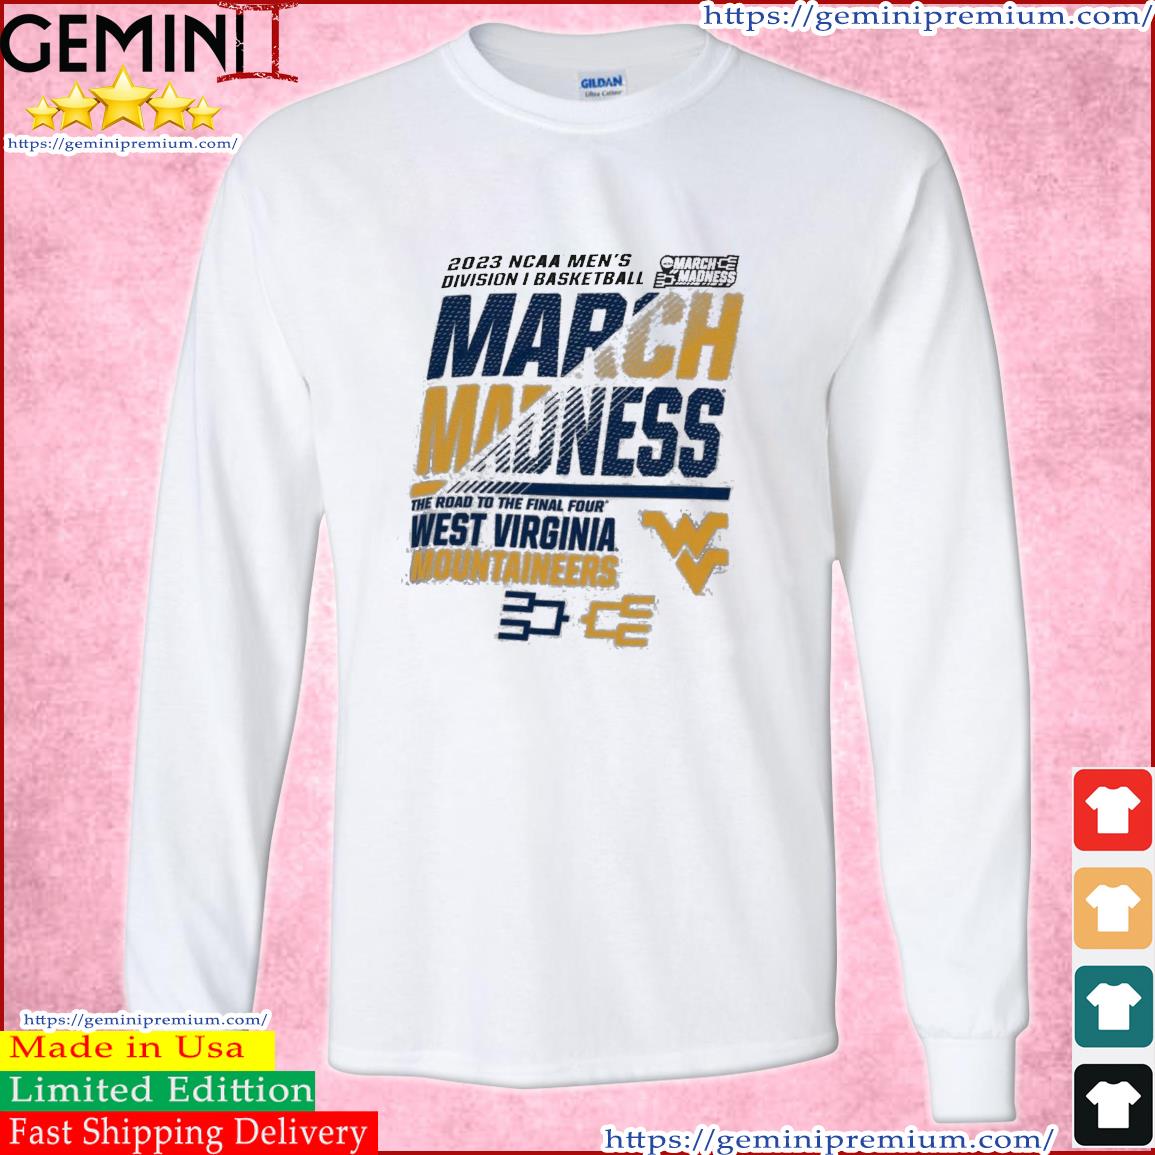 West Virginia Men's Basketball 2023 NCAA March Madness The Road To Final Four Shirt Long Sleeve Tee